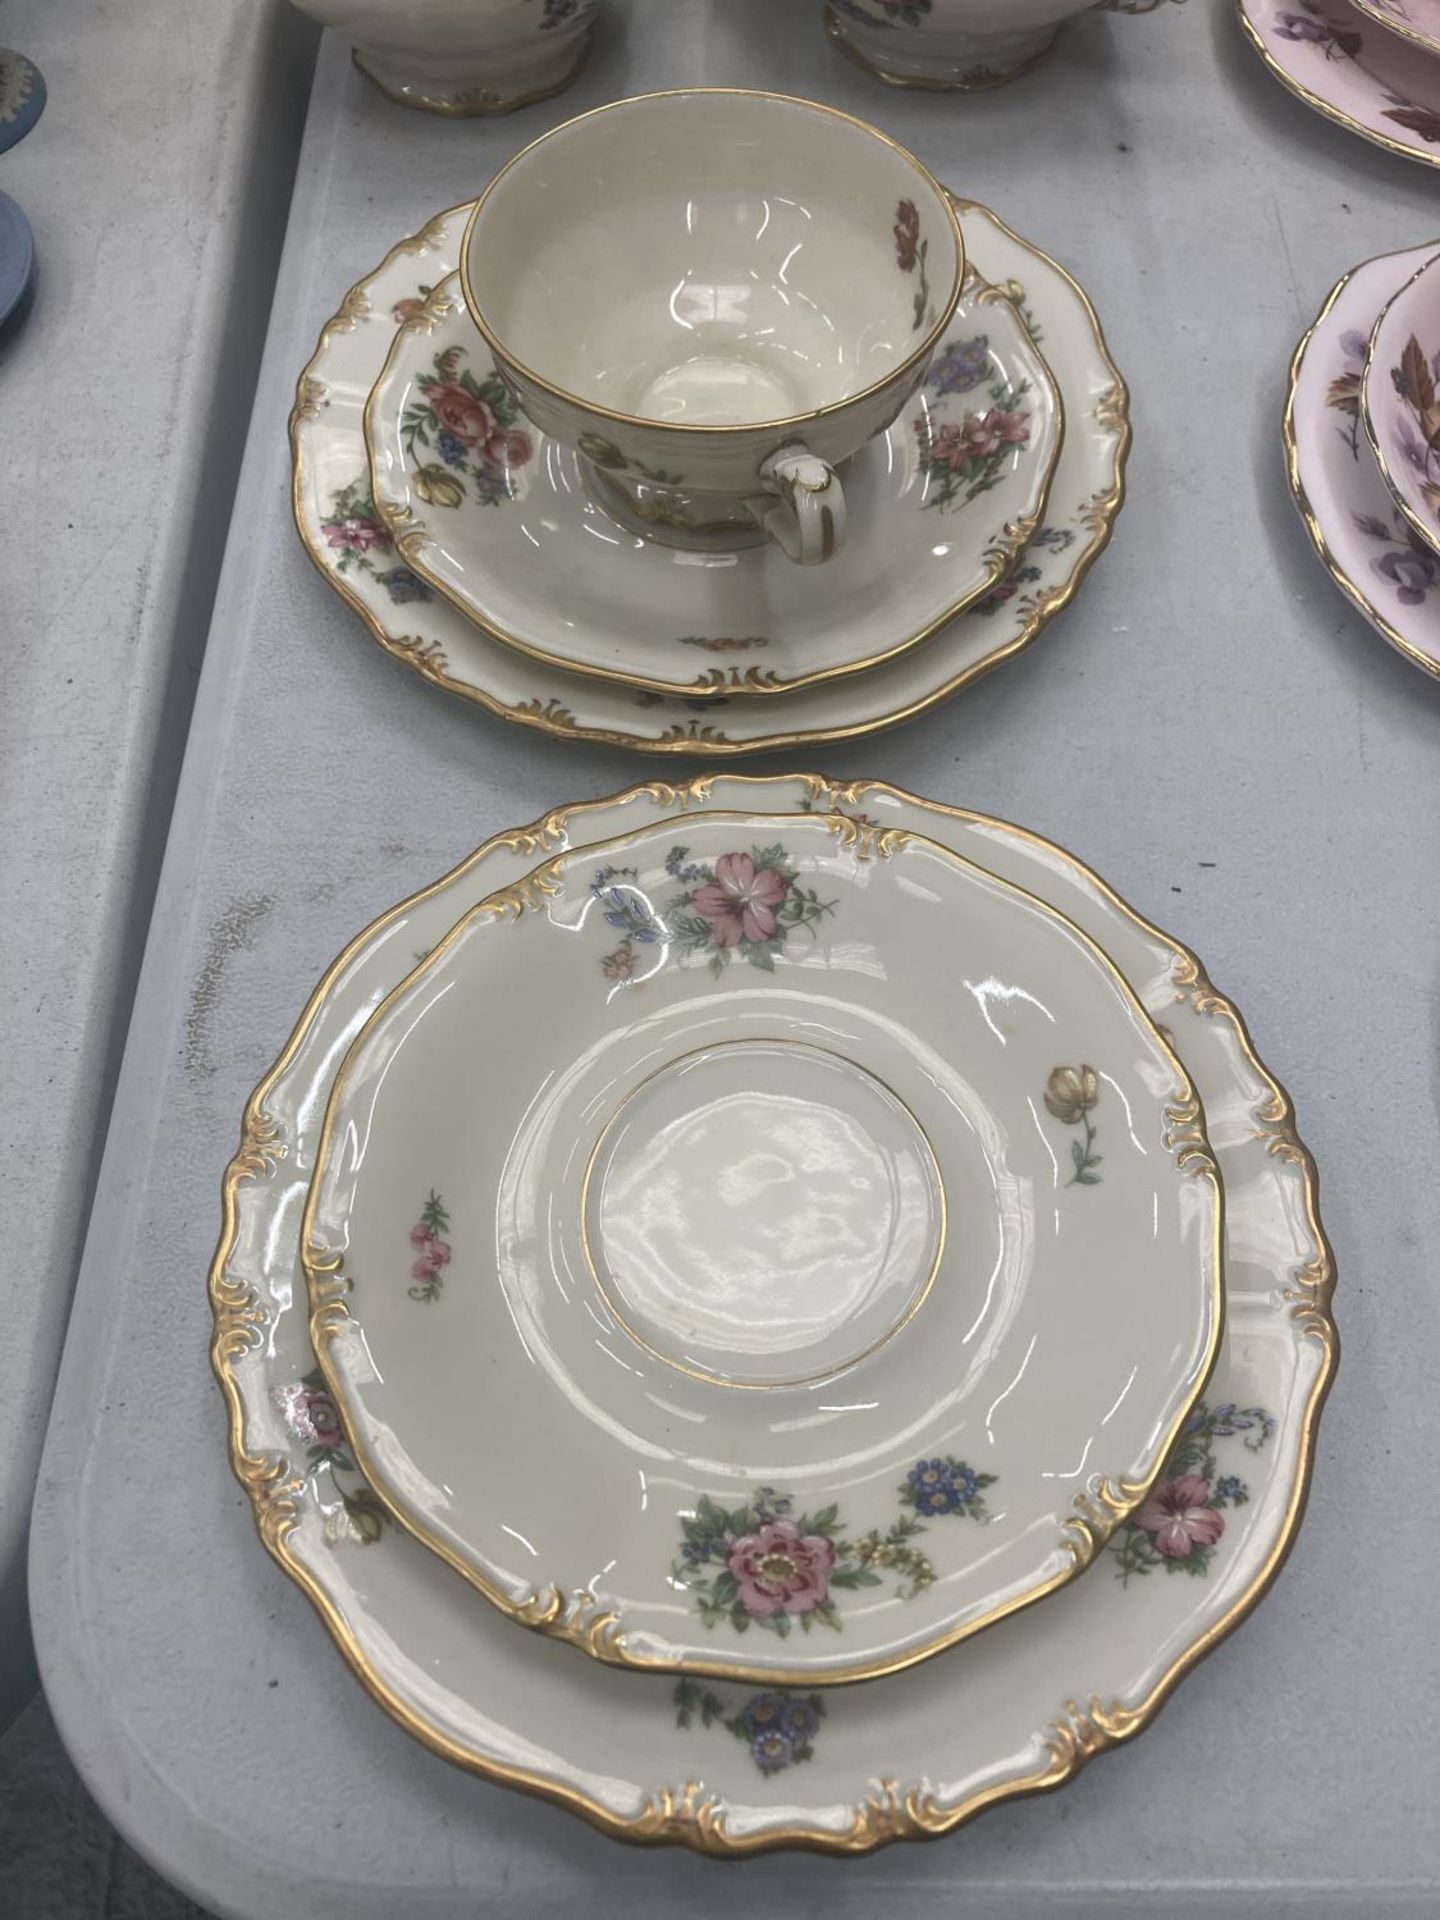 A PIRKEN HAMMER TEASET WITH A DELICATE FLORAL DESIGN WITH GILT RIMS TO INCLUDE A TEAPOT, CREAM - Image 5 of 5